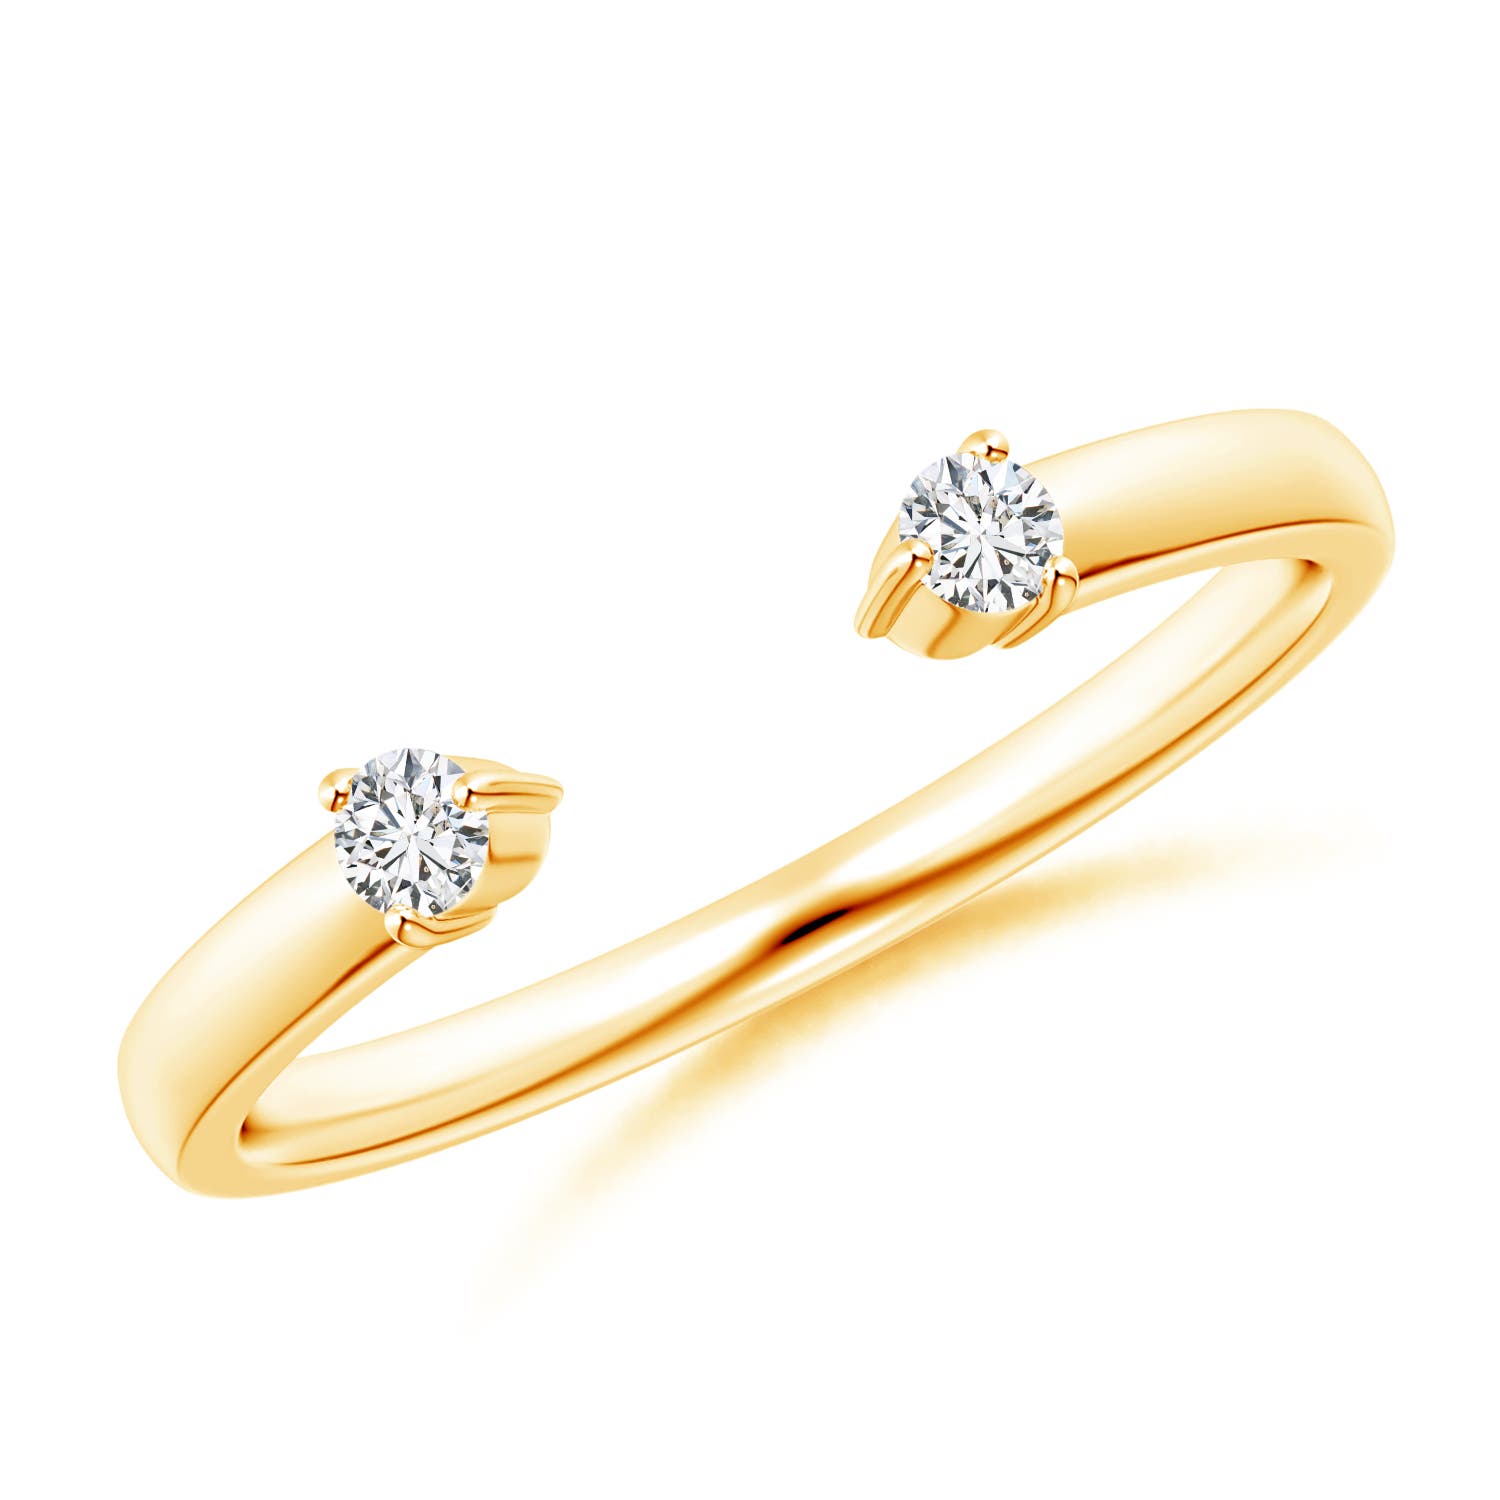 H, SI2 / 0.1 CT / 14 KT Yellow Gold